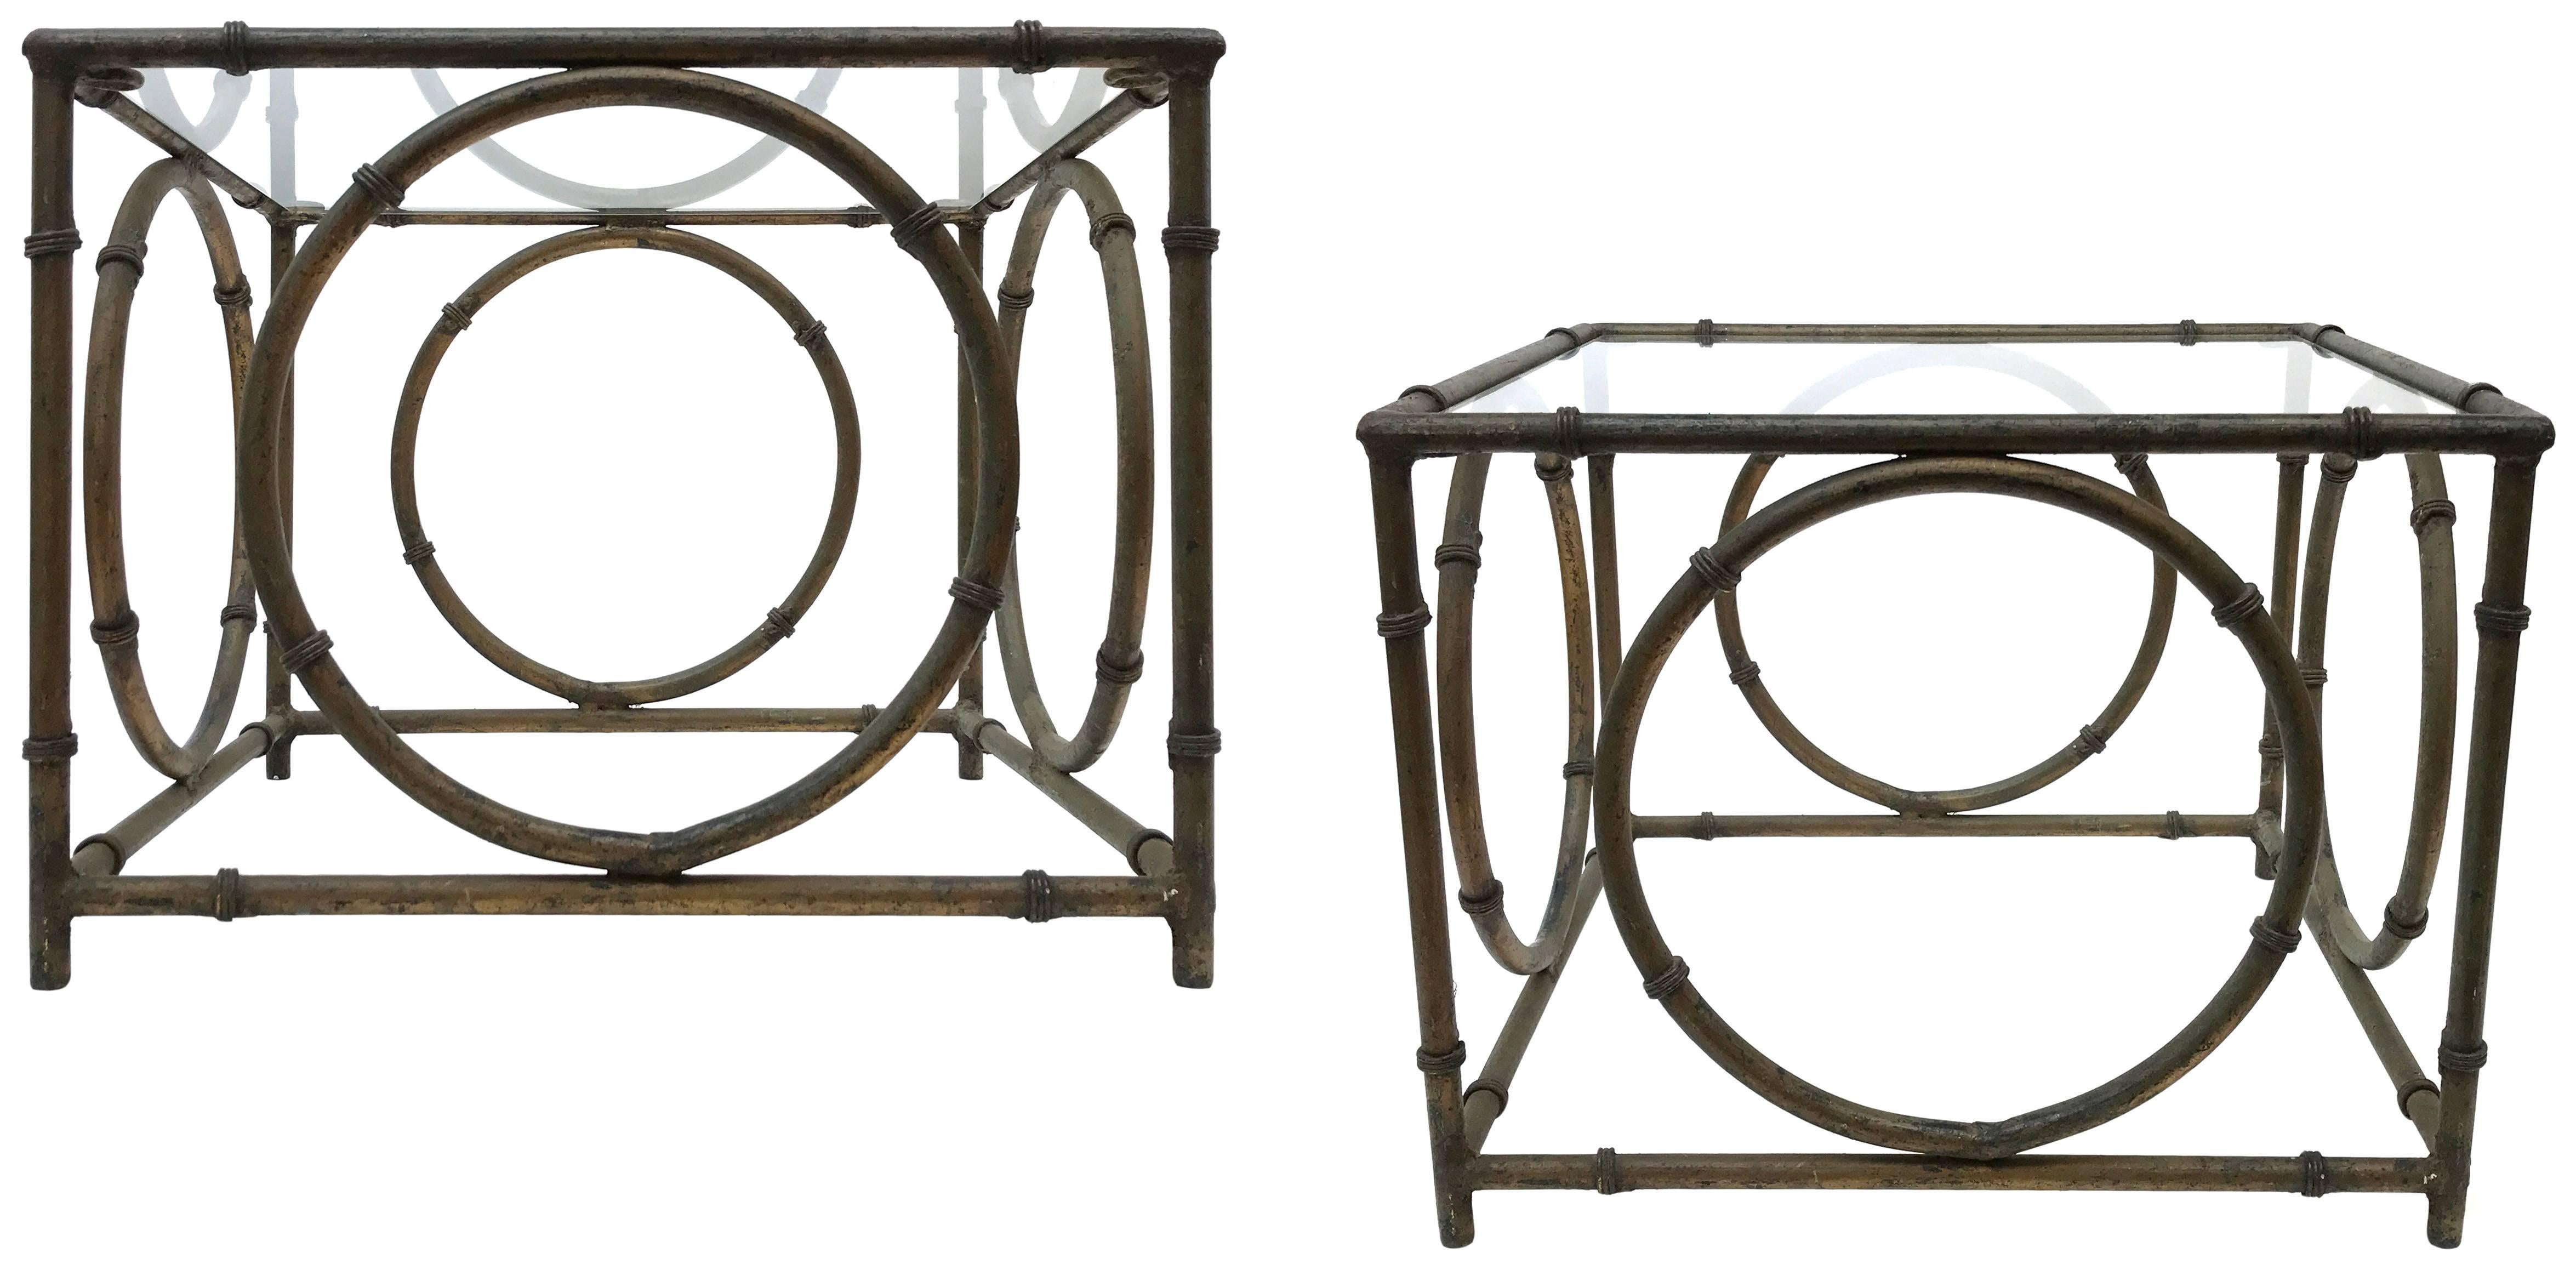 A wonderful pair of Italian wrought-iron and glass side tables. Elegant faux-bamboo with an applied, faux-bronze patina beautifully mottled from years of life outdoors. Great from all angles. Classic forms with a subtly surreal and op-art presence: